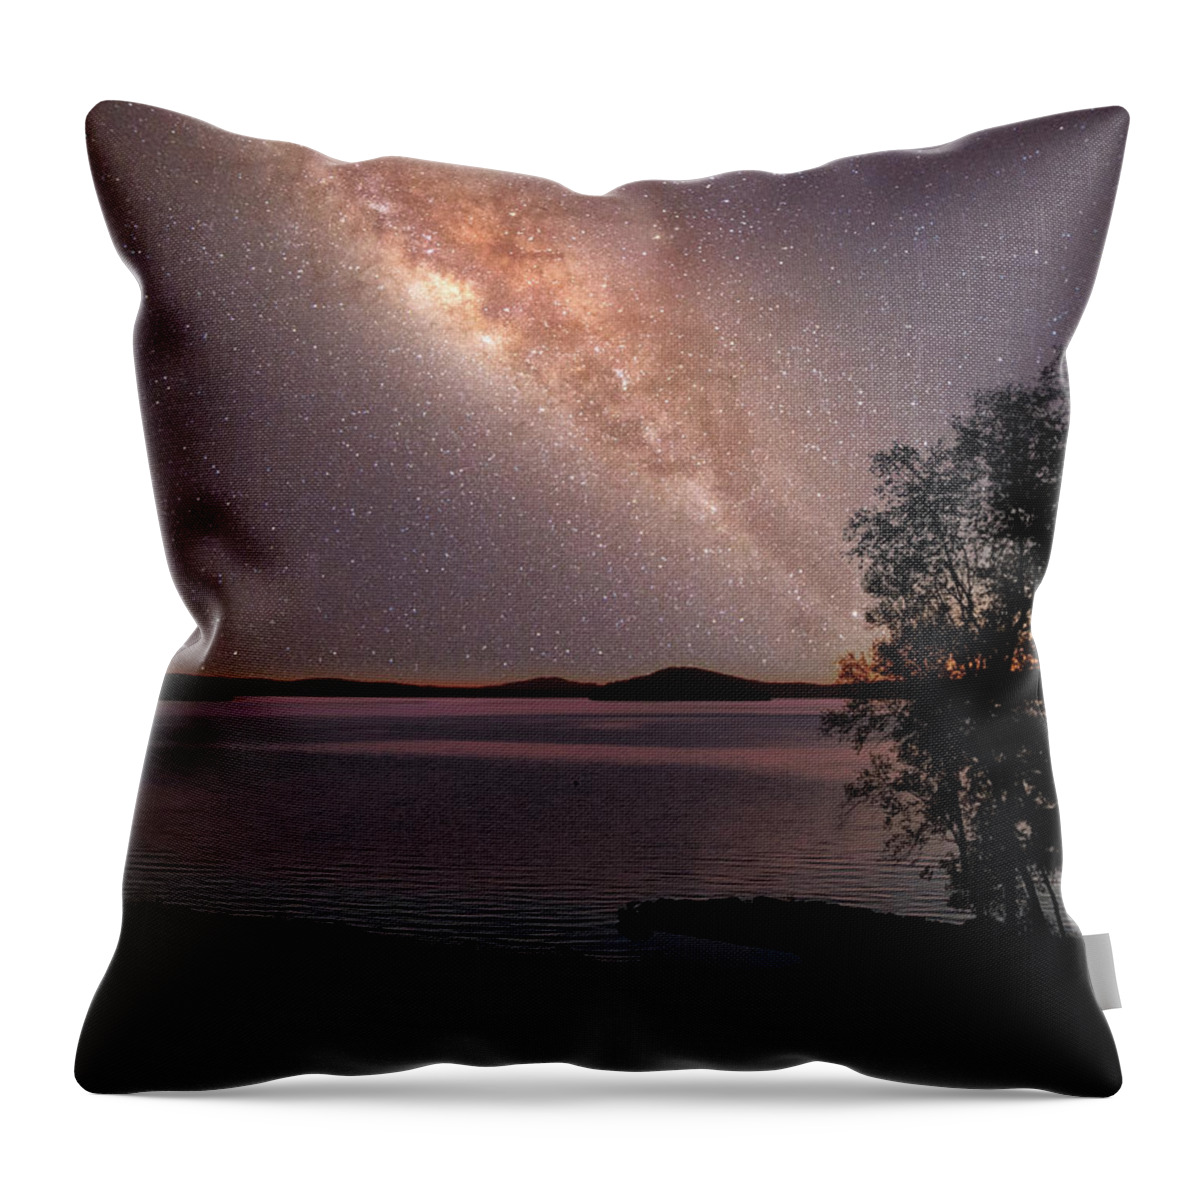 Milky Way Throw Pillow featuring the photograph Milky Way Over Maine by Russel Considine